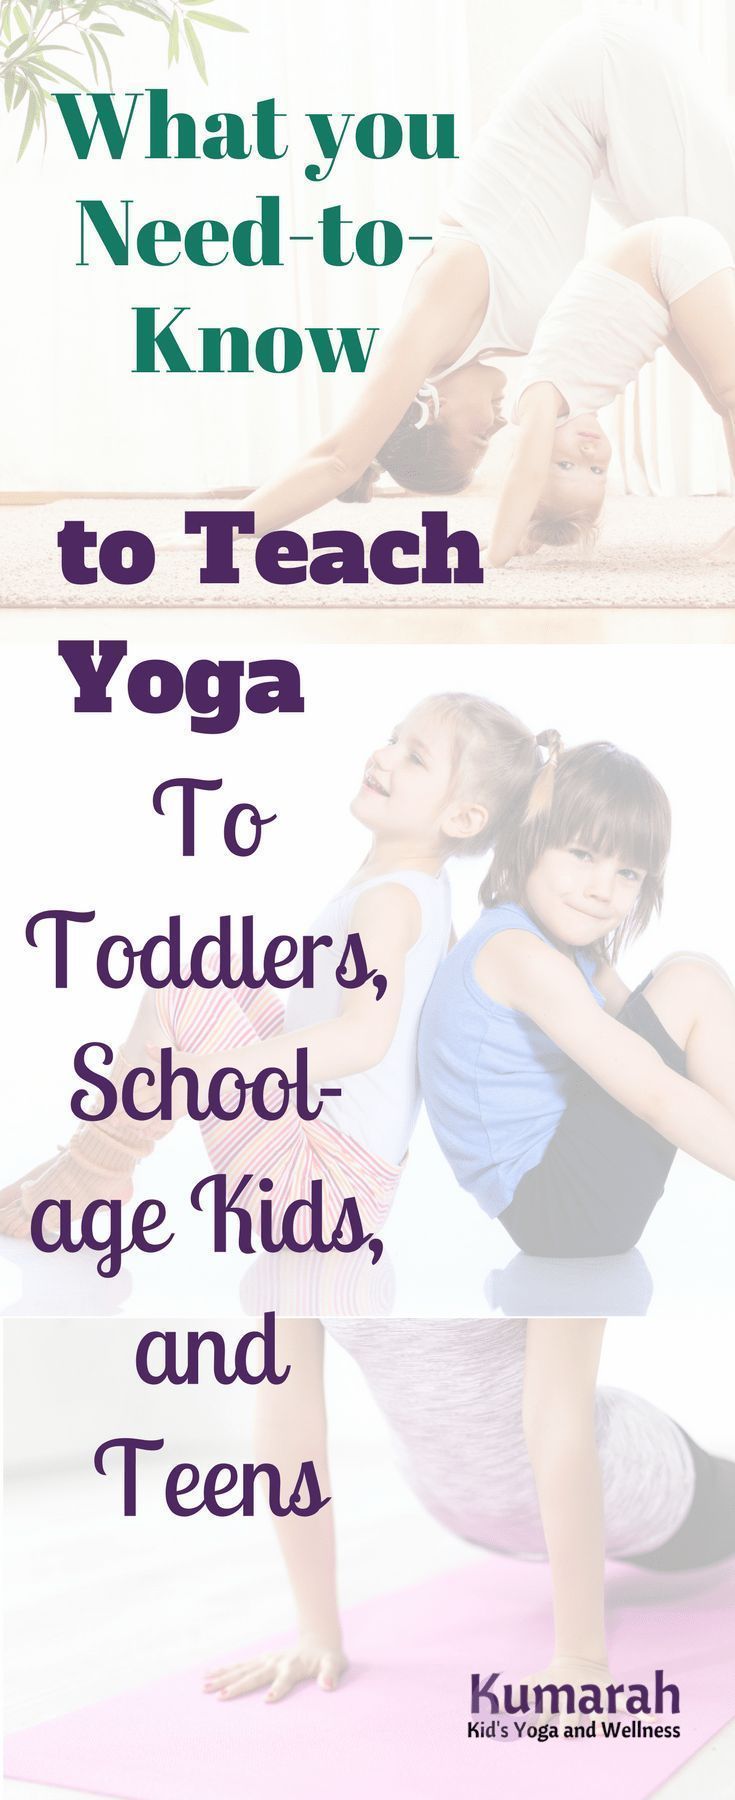 Teach Yoga to Kids Based on their Development | Learn what kids need according t...